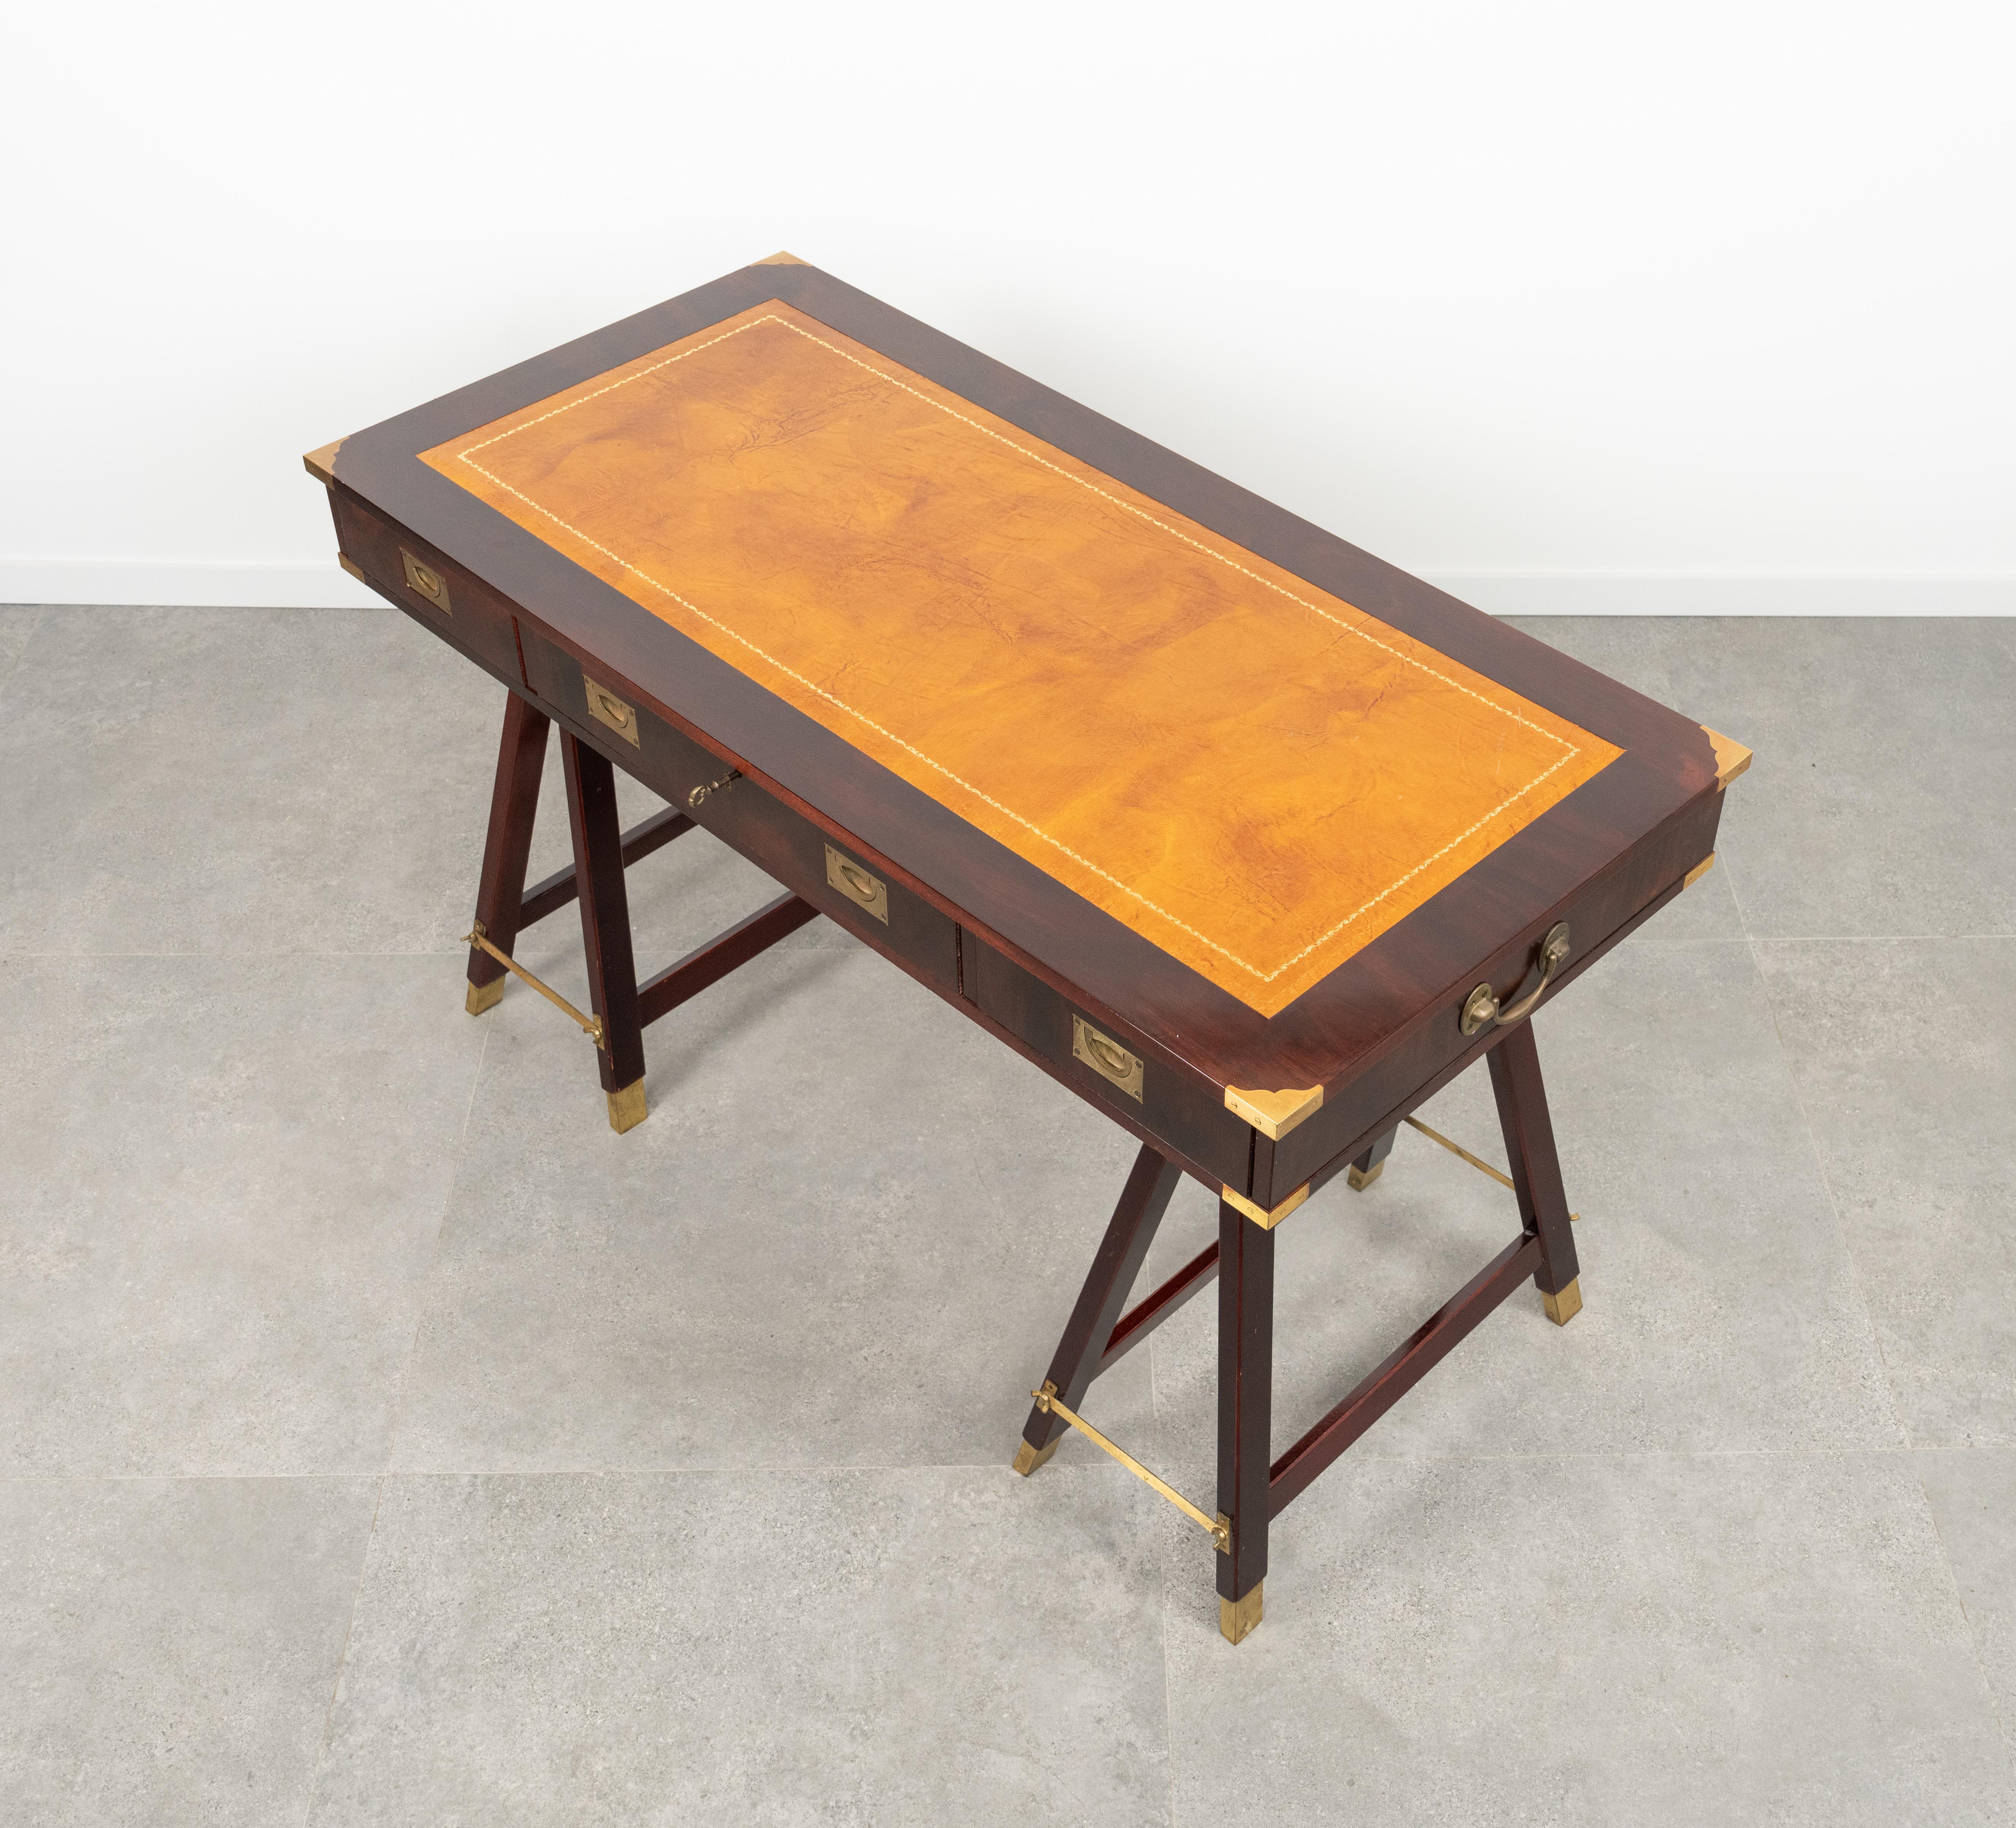 Military Campaign Style Desk Table in Wood, Brass and Leather, Italy 1960s For Sale 1